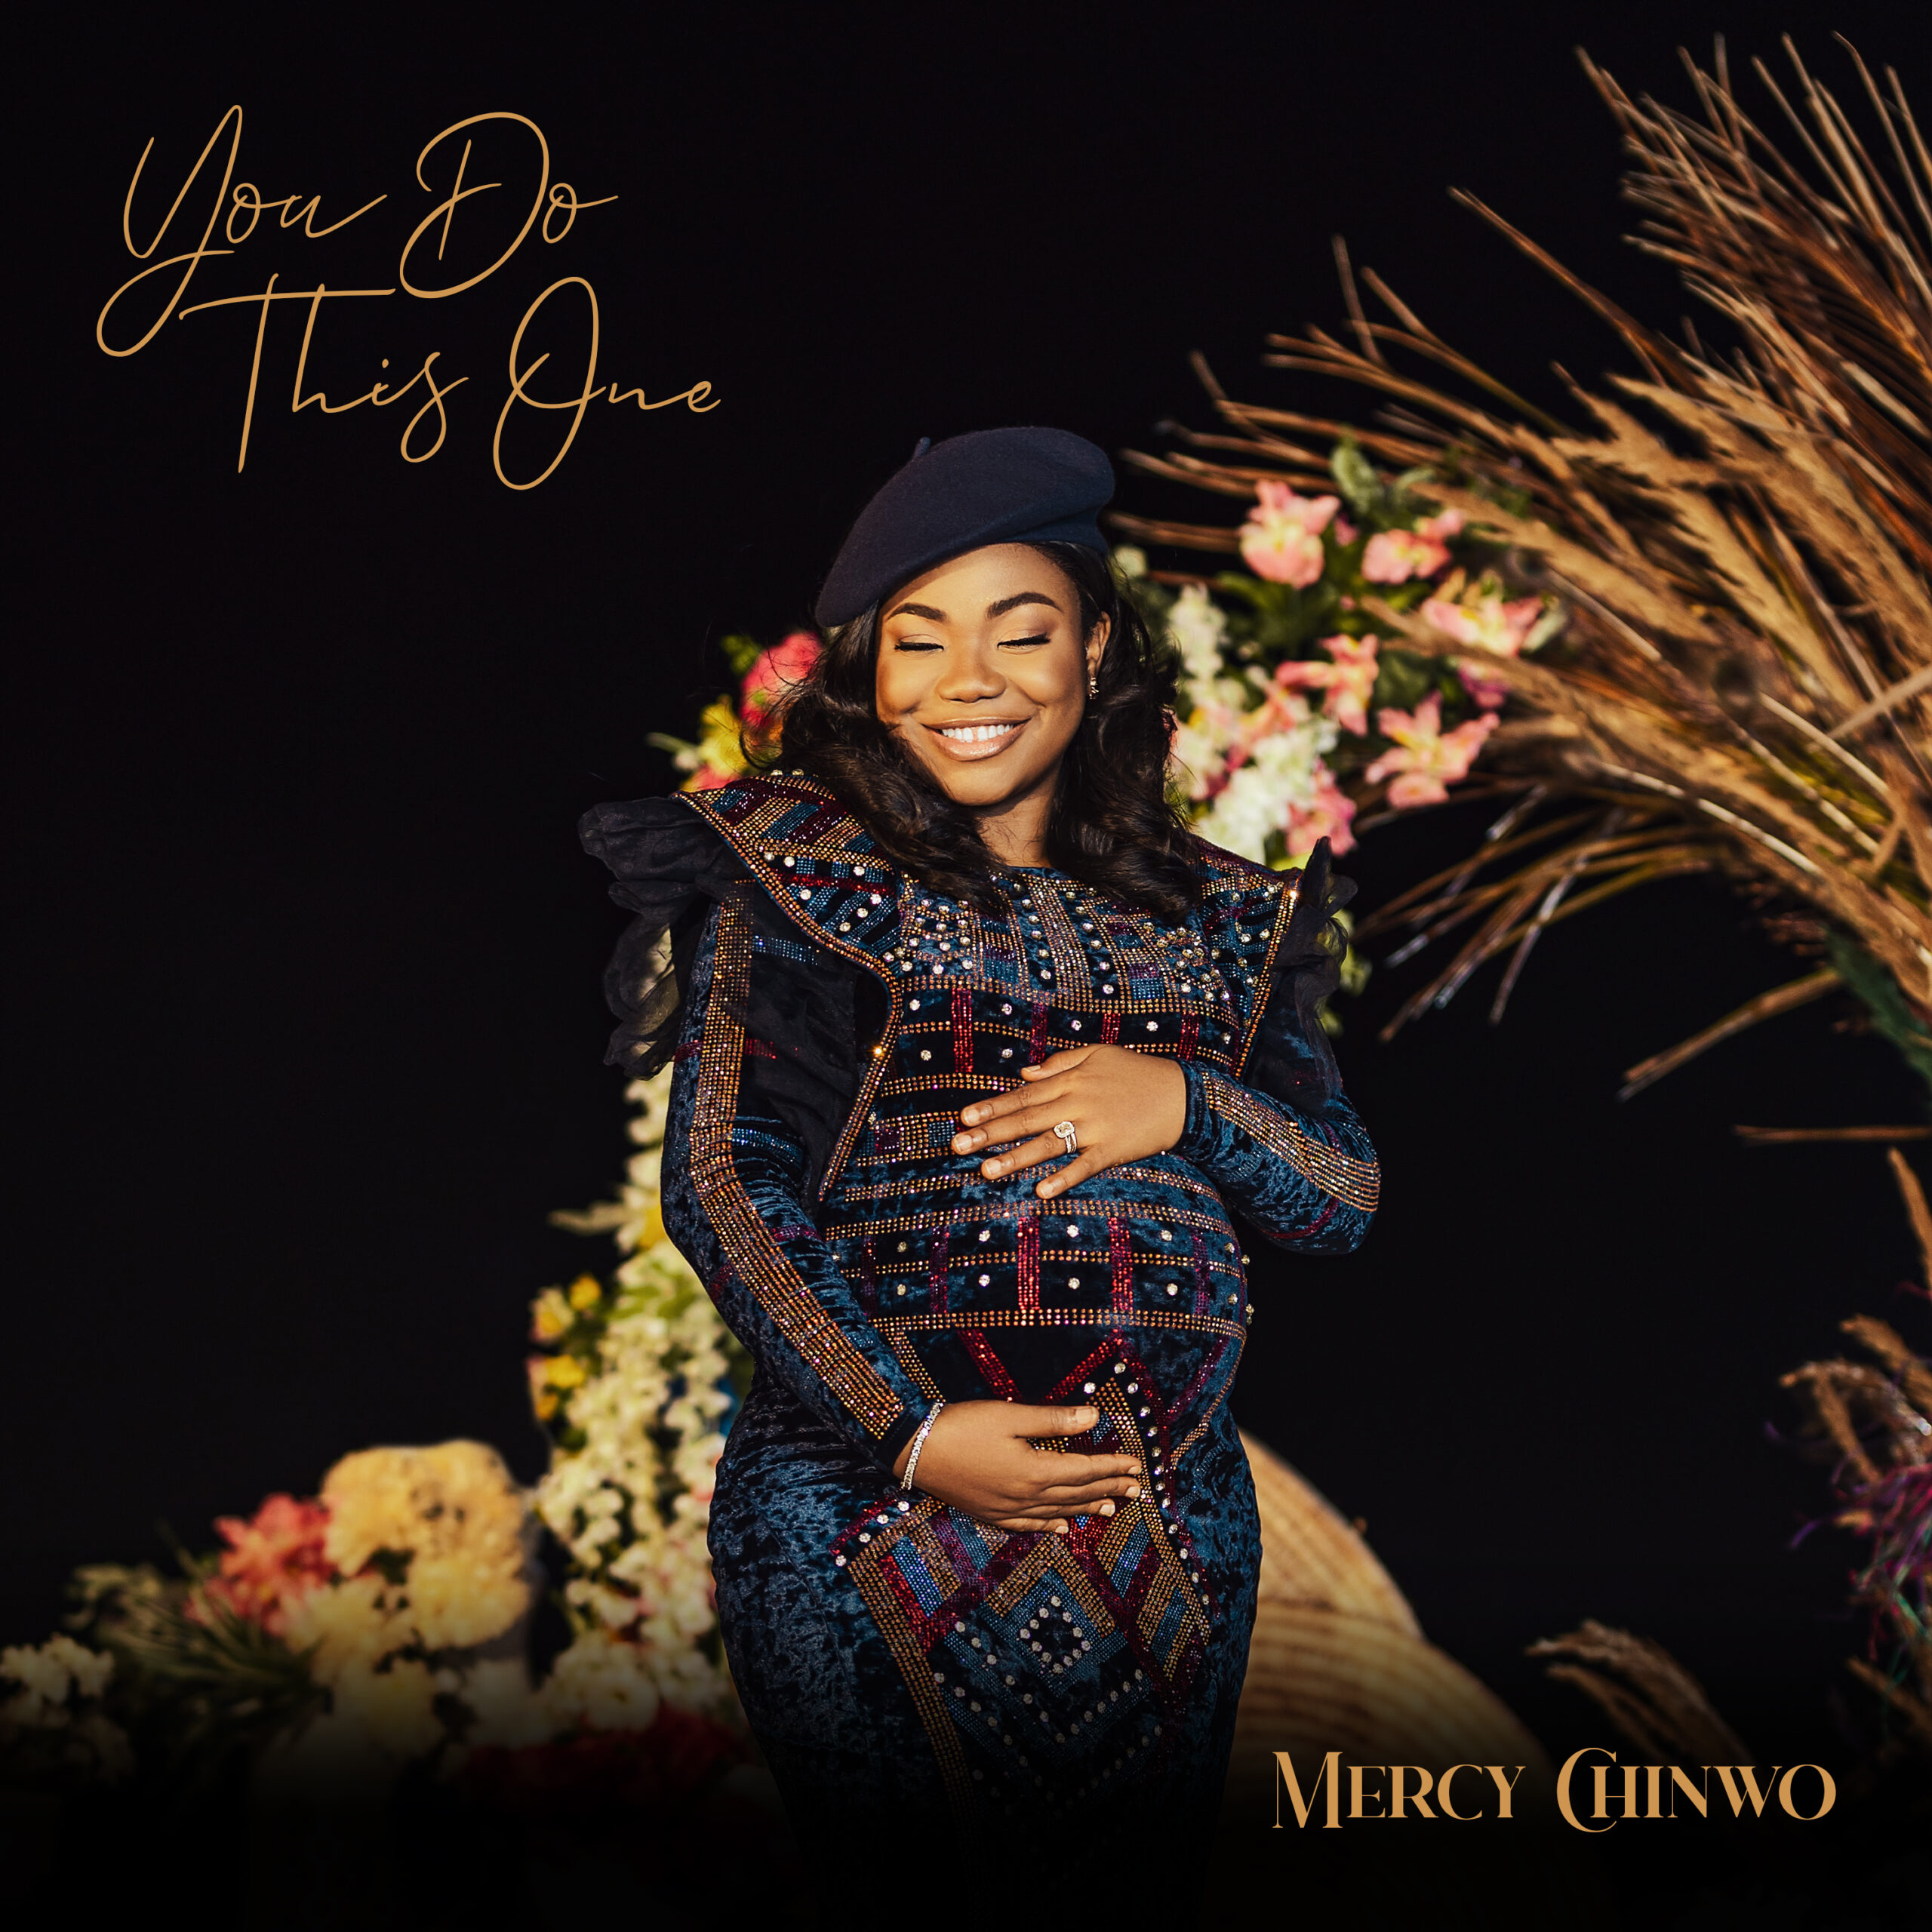 MERCY CHINWO'S "YOU DO THIS ONE" MUSIC VIDEO SURPASSES 1 MILLION VIEWS IN JUST THREE DAYS